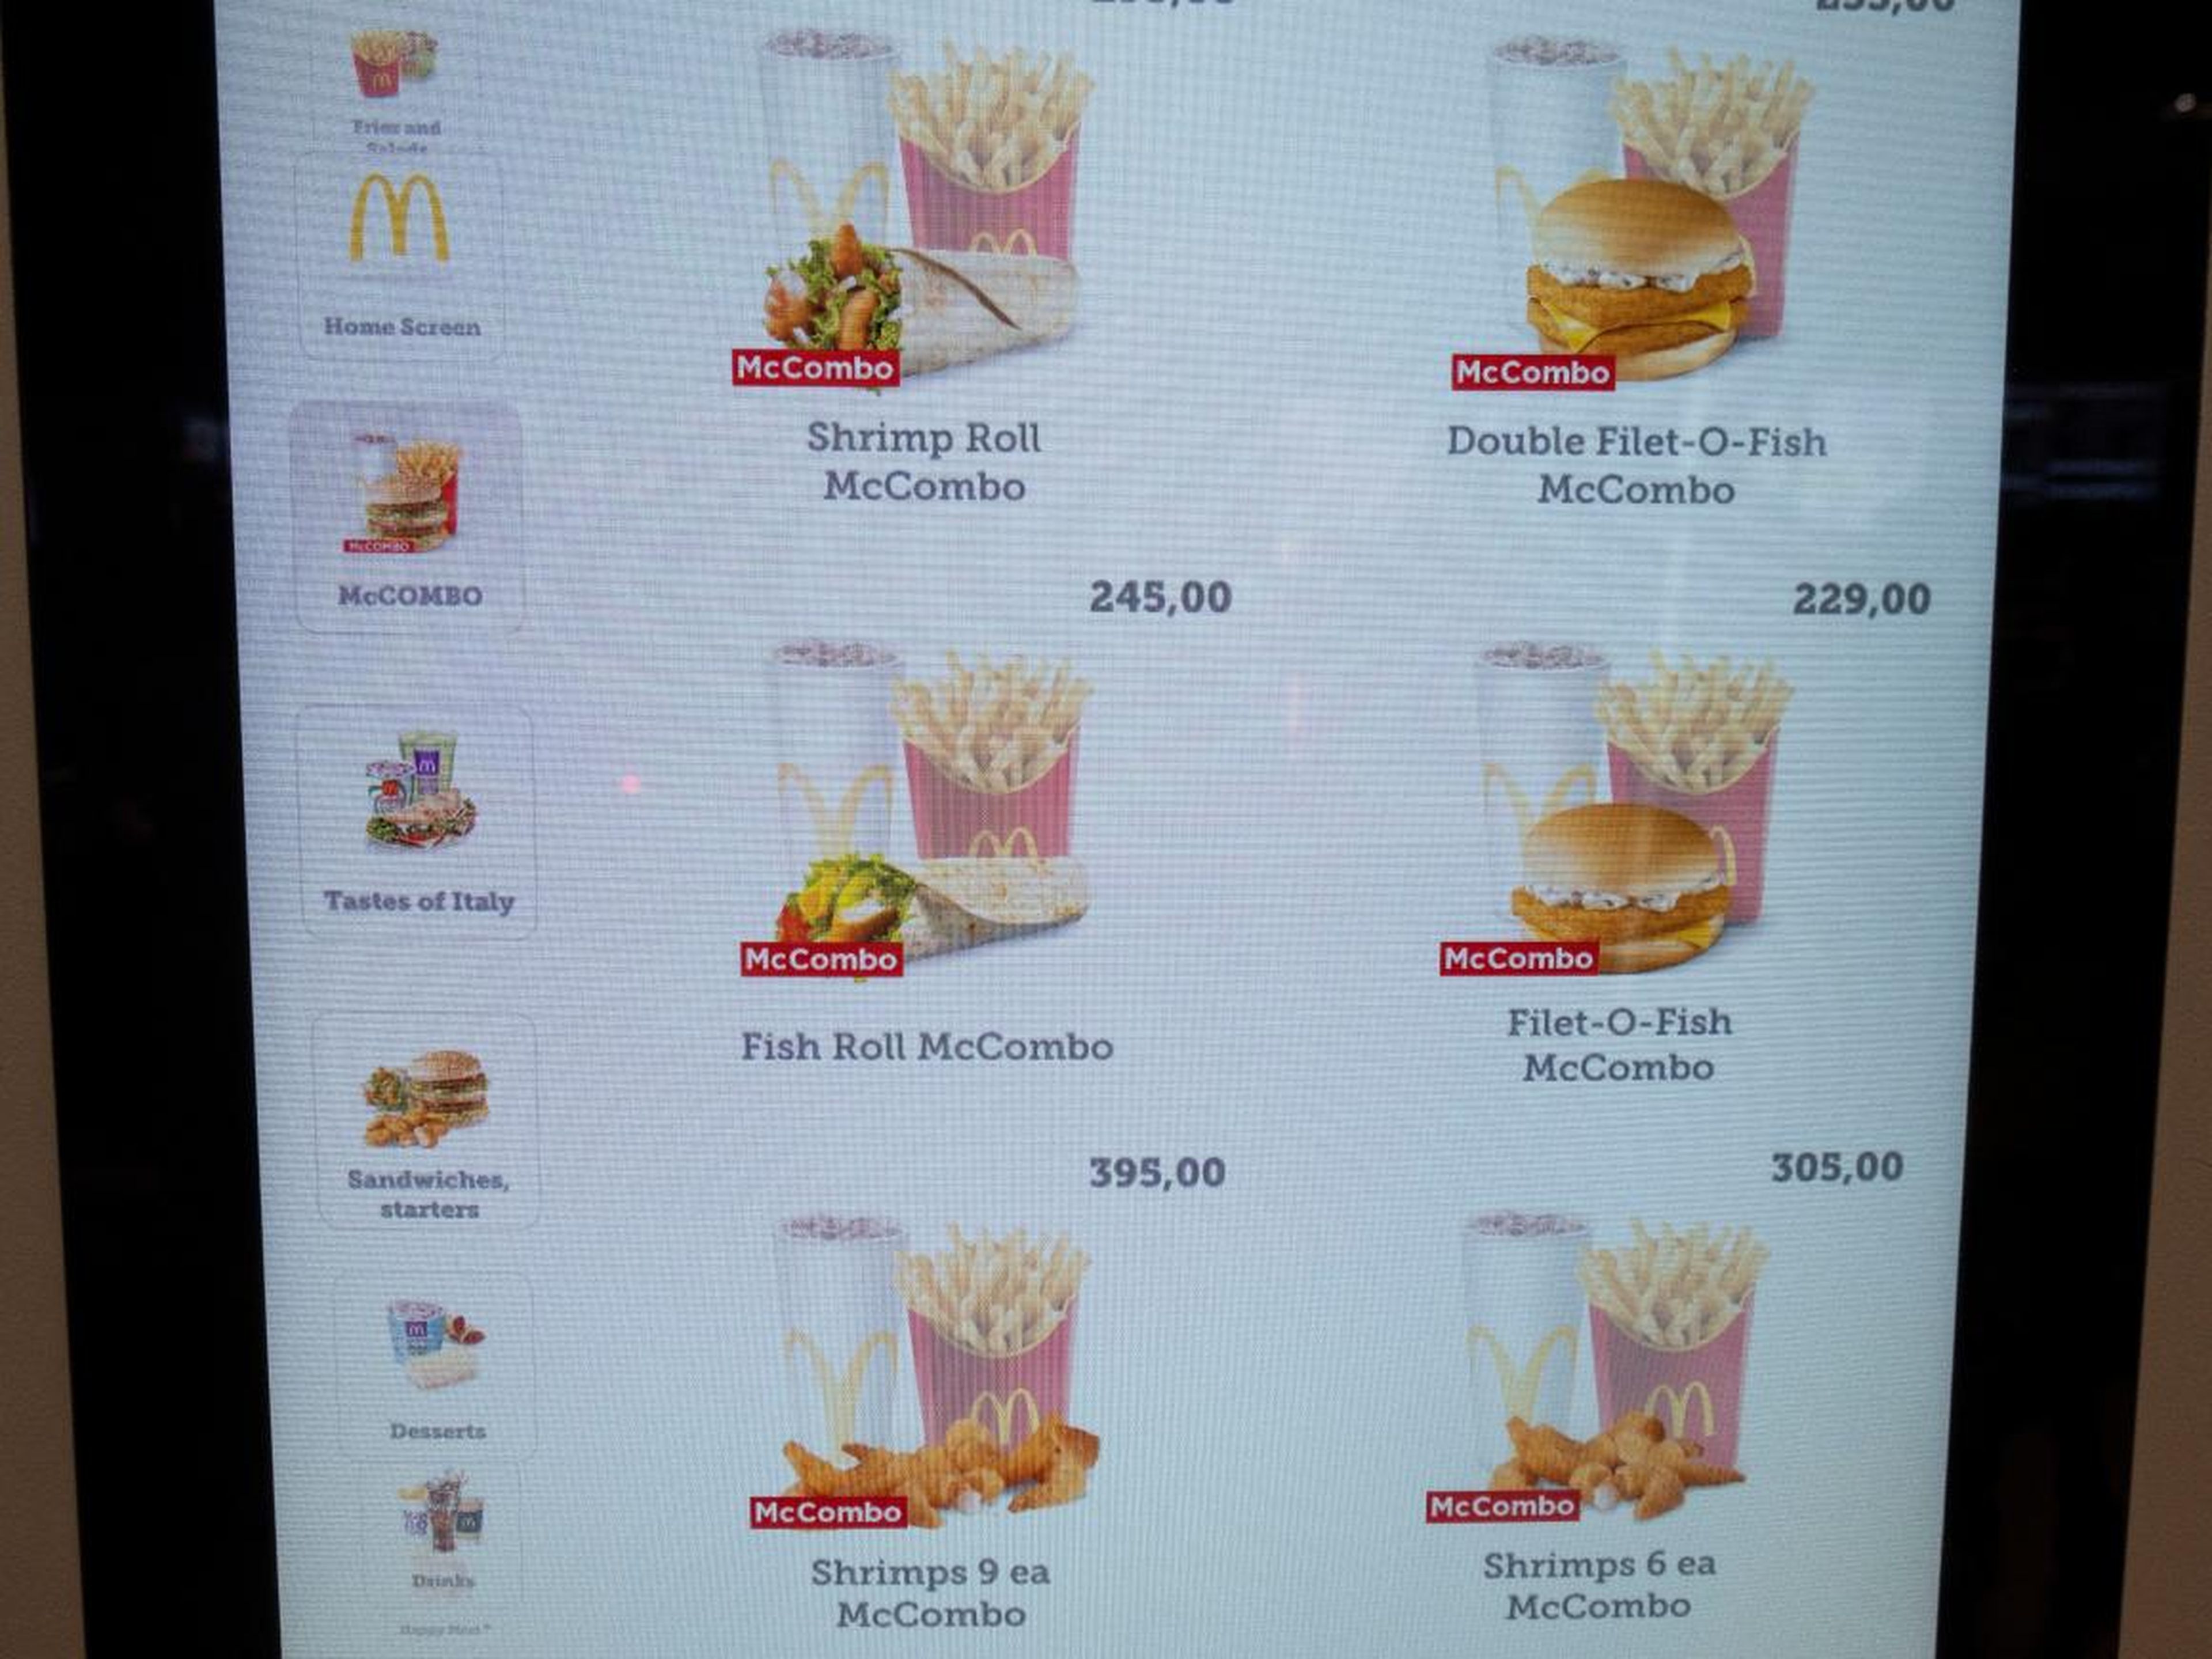 The Moscow McDonald's had more seafood options than I was expecting.